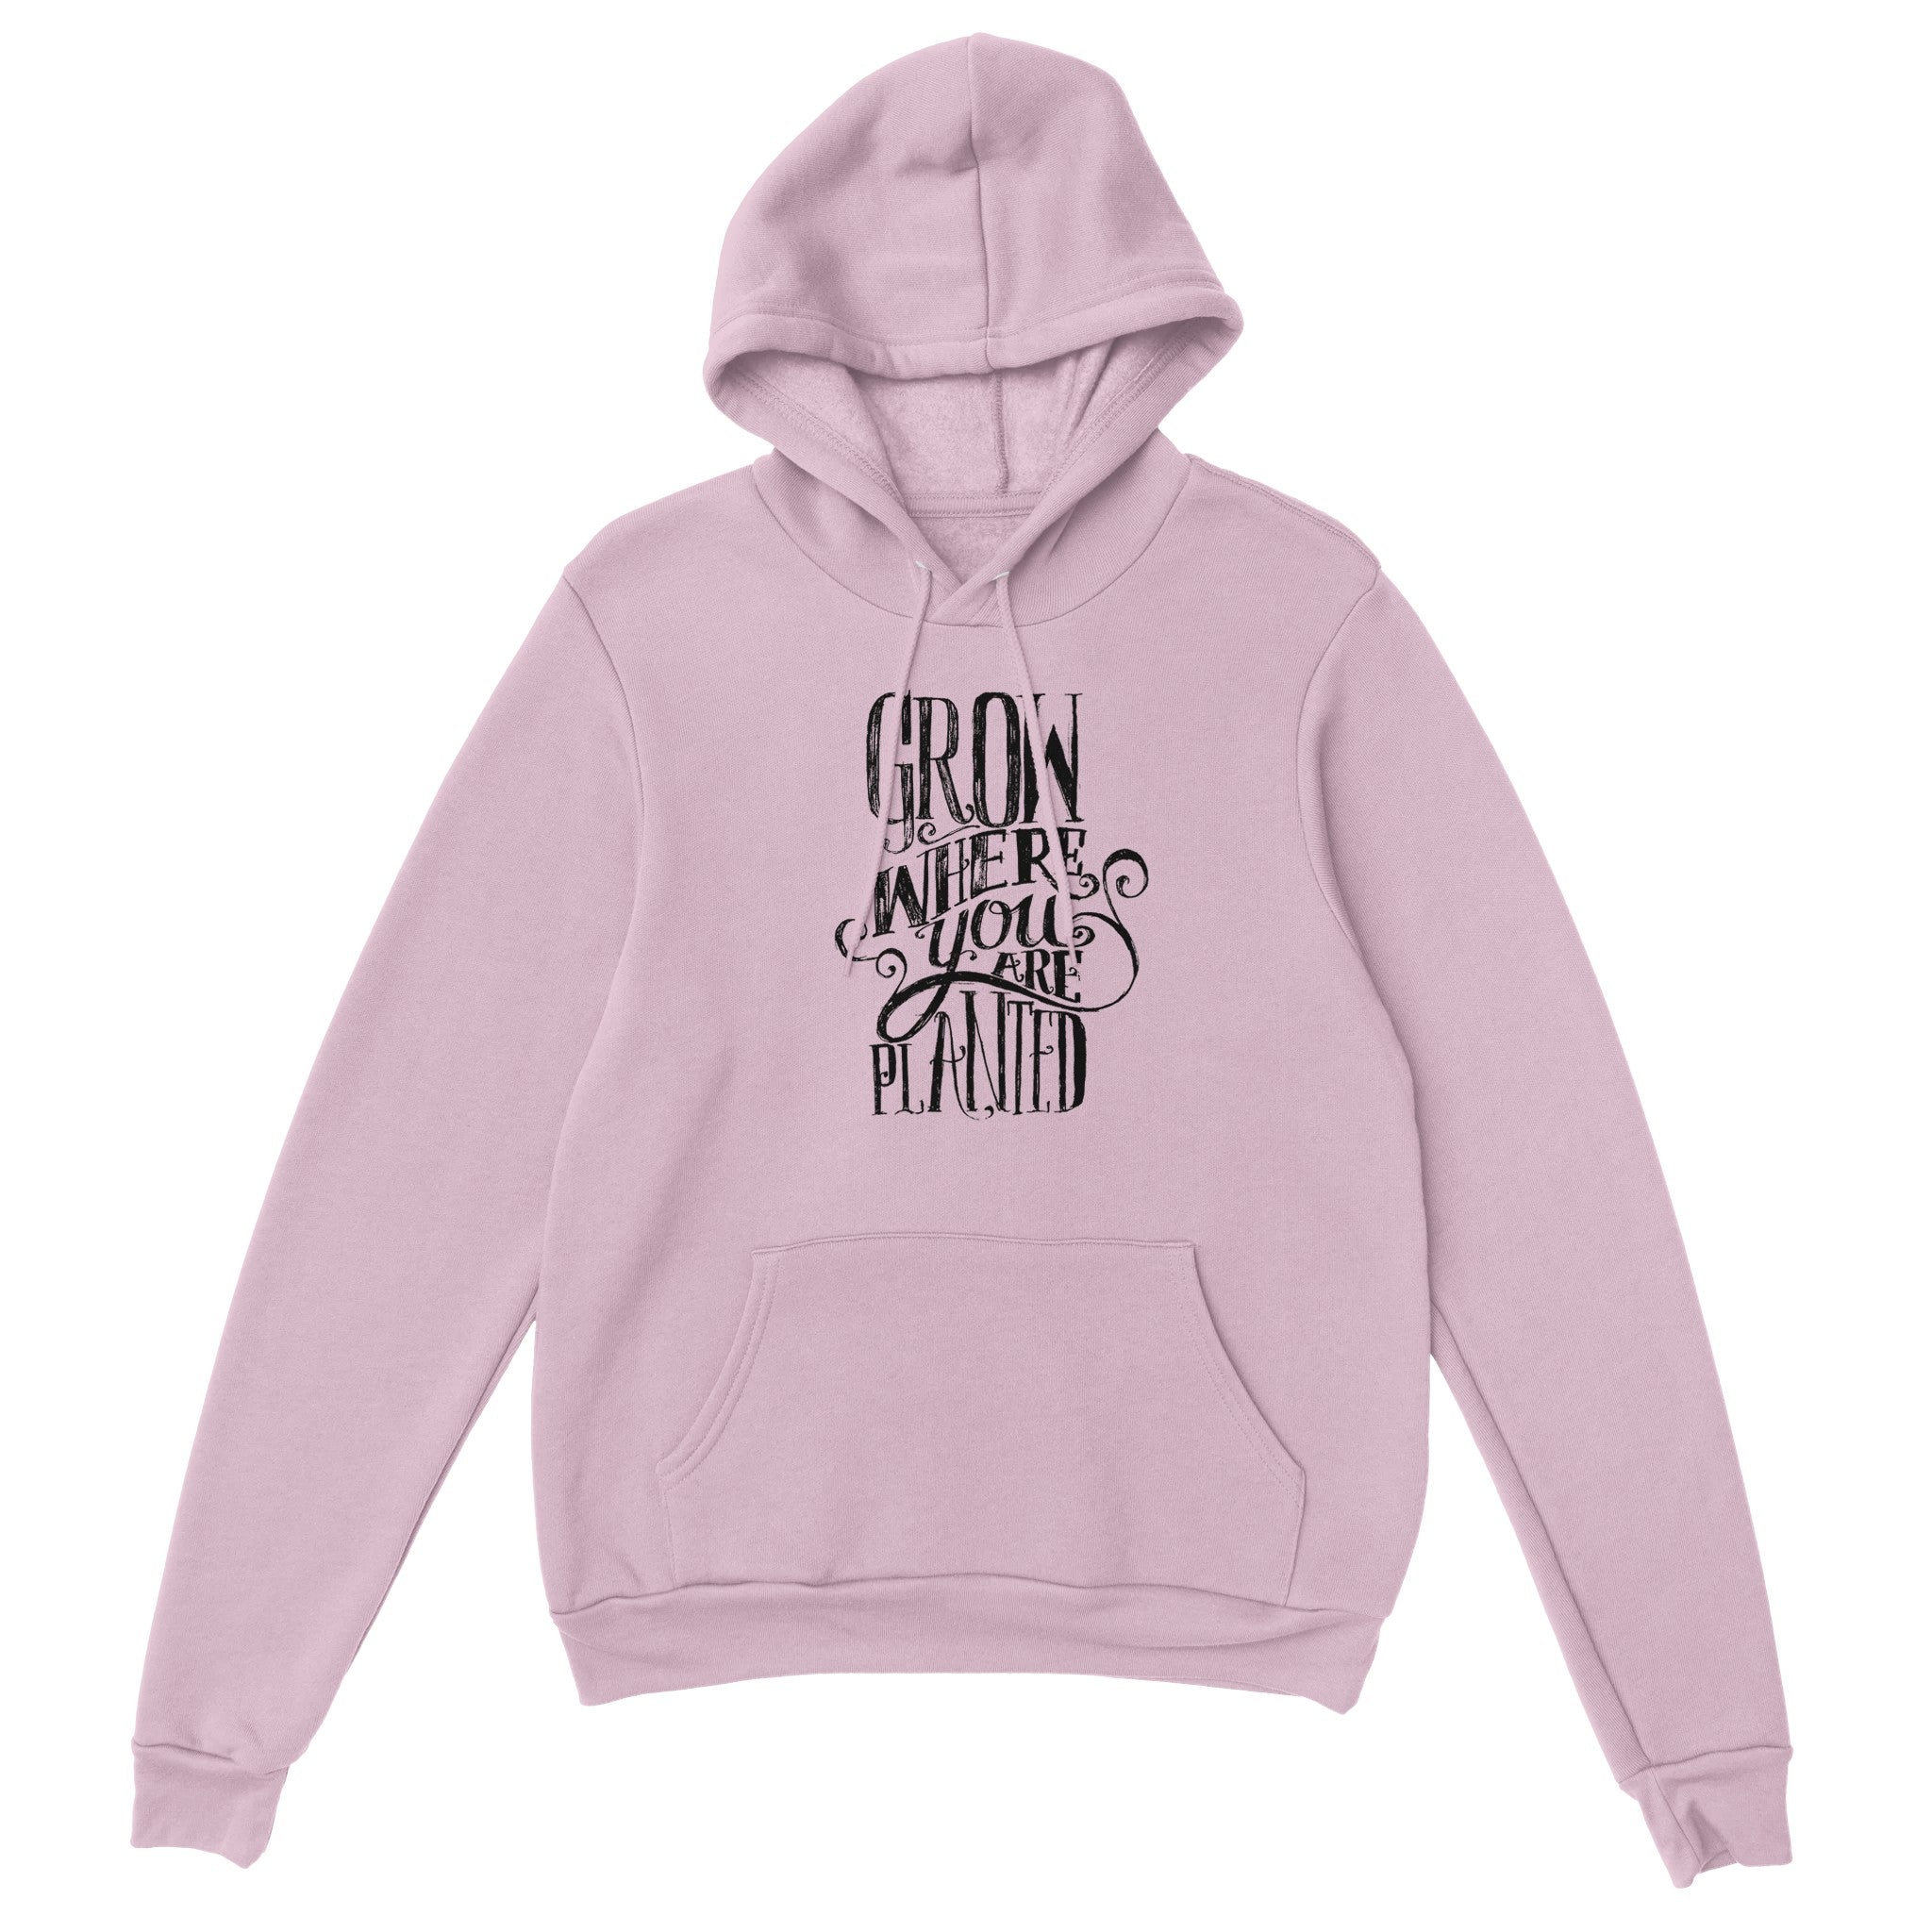 Grow Where You Are Planted Pullover Hoodie - Optimalprint